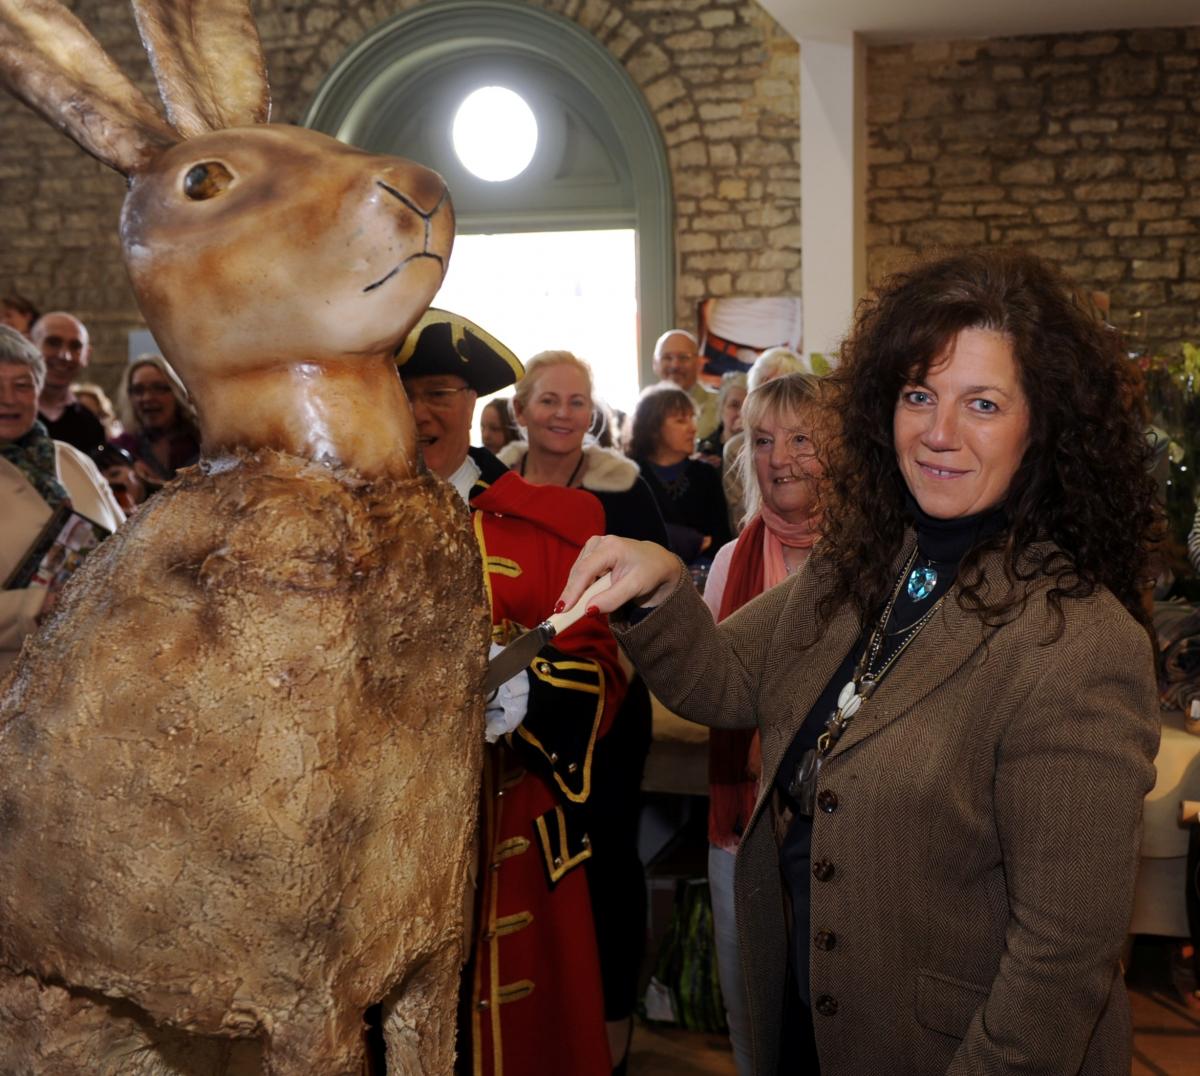 Countess Bathurst cuts the Hare Cake in the Cornhall, as part of the launch of the Hare Festival in Cirencester